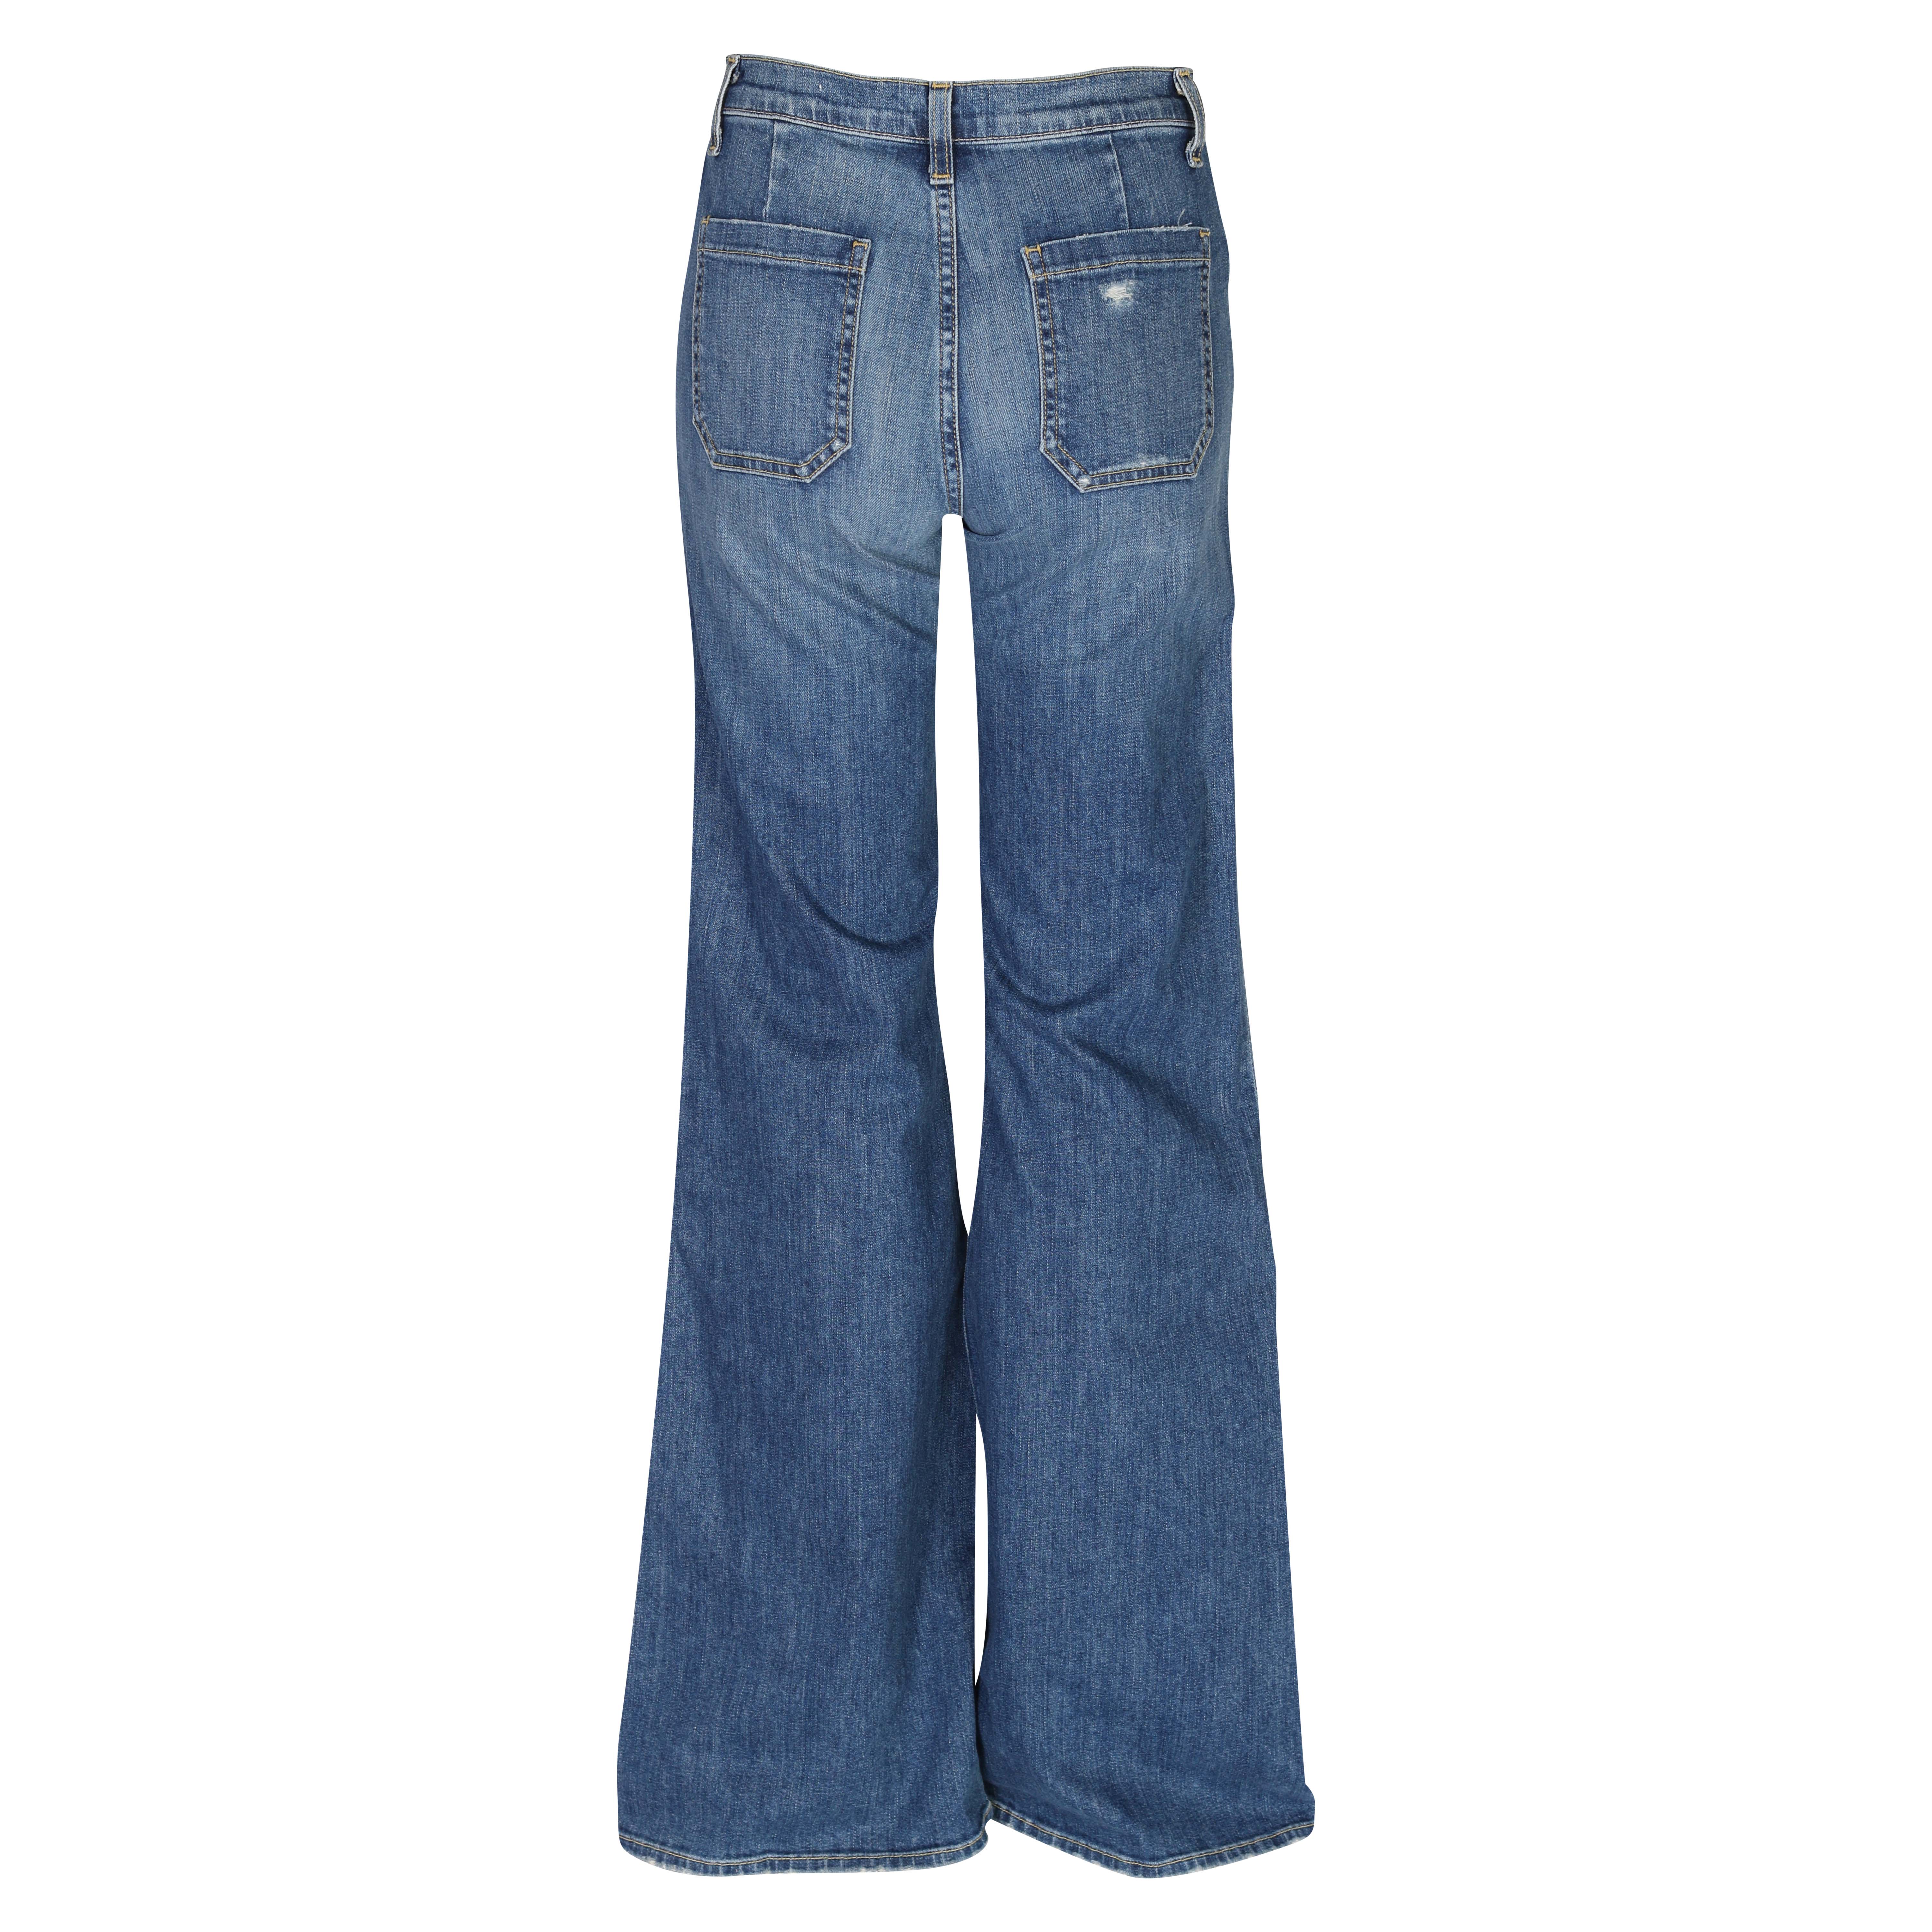 Nili Lotan Florence Jeans in Classic Washed 26